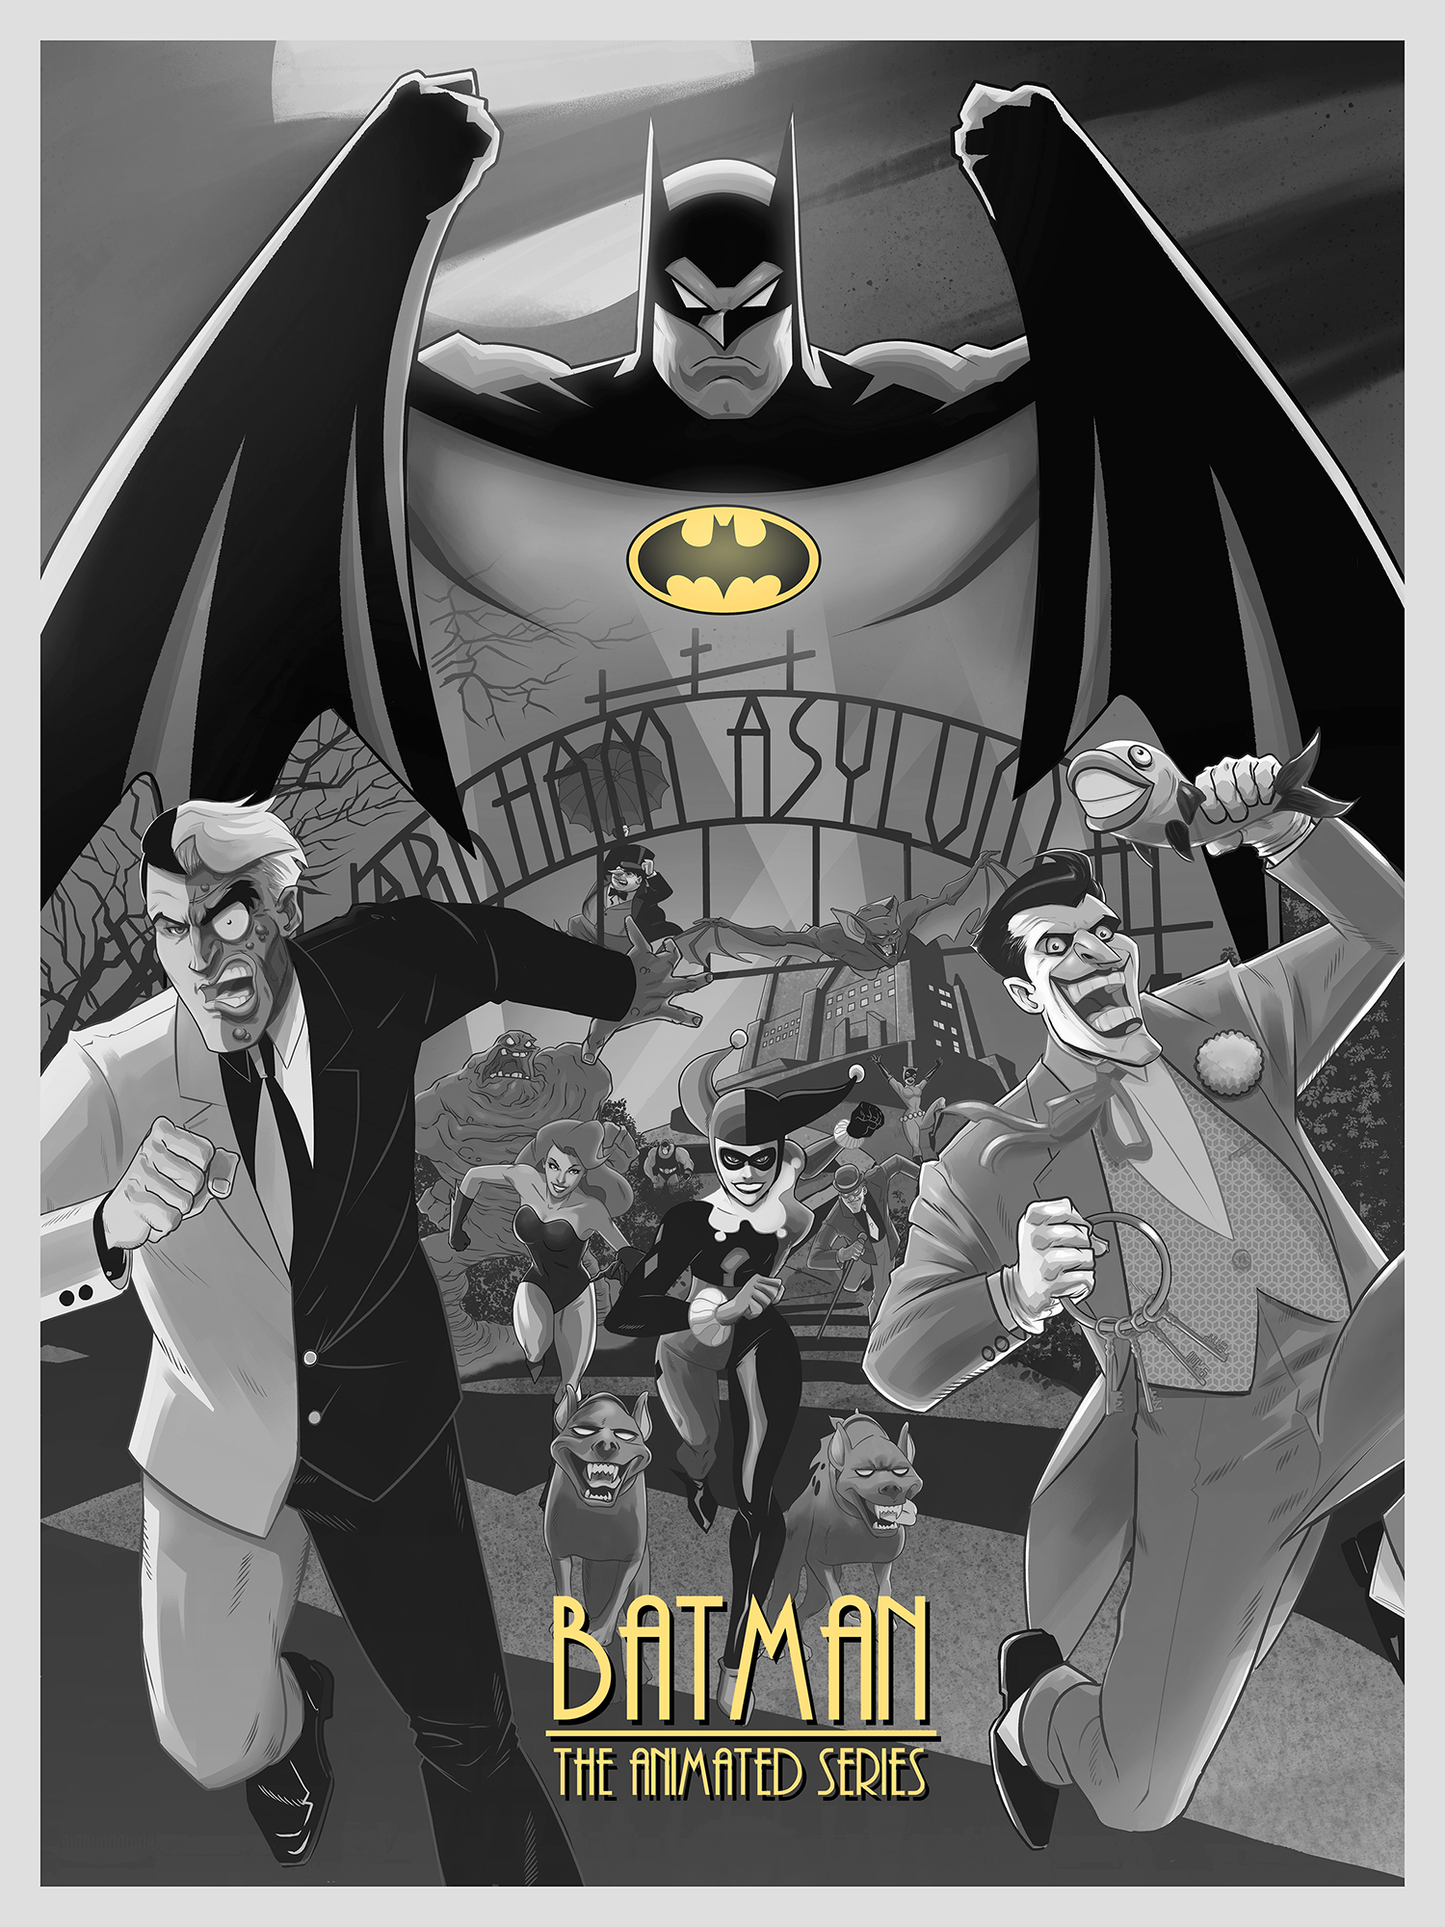 Mike McGee "Batman: The Animated Series" Variant